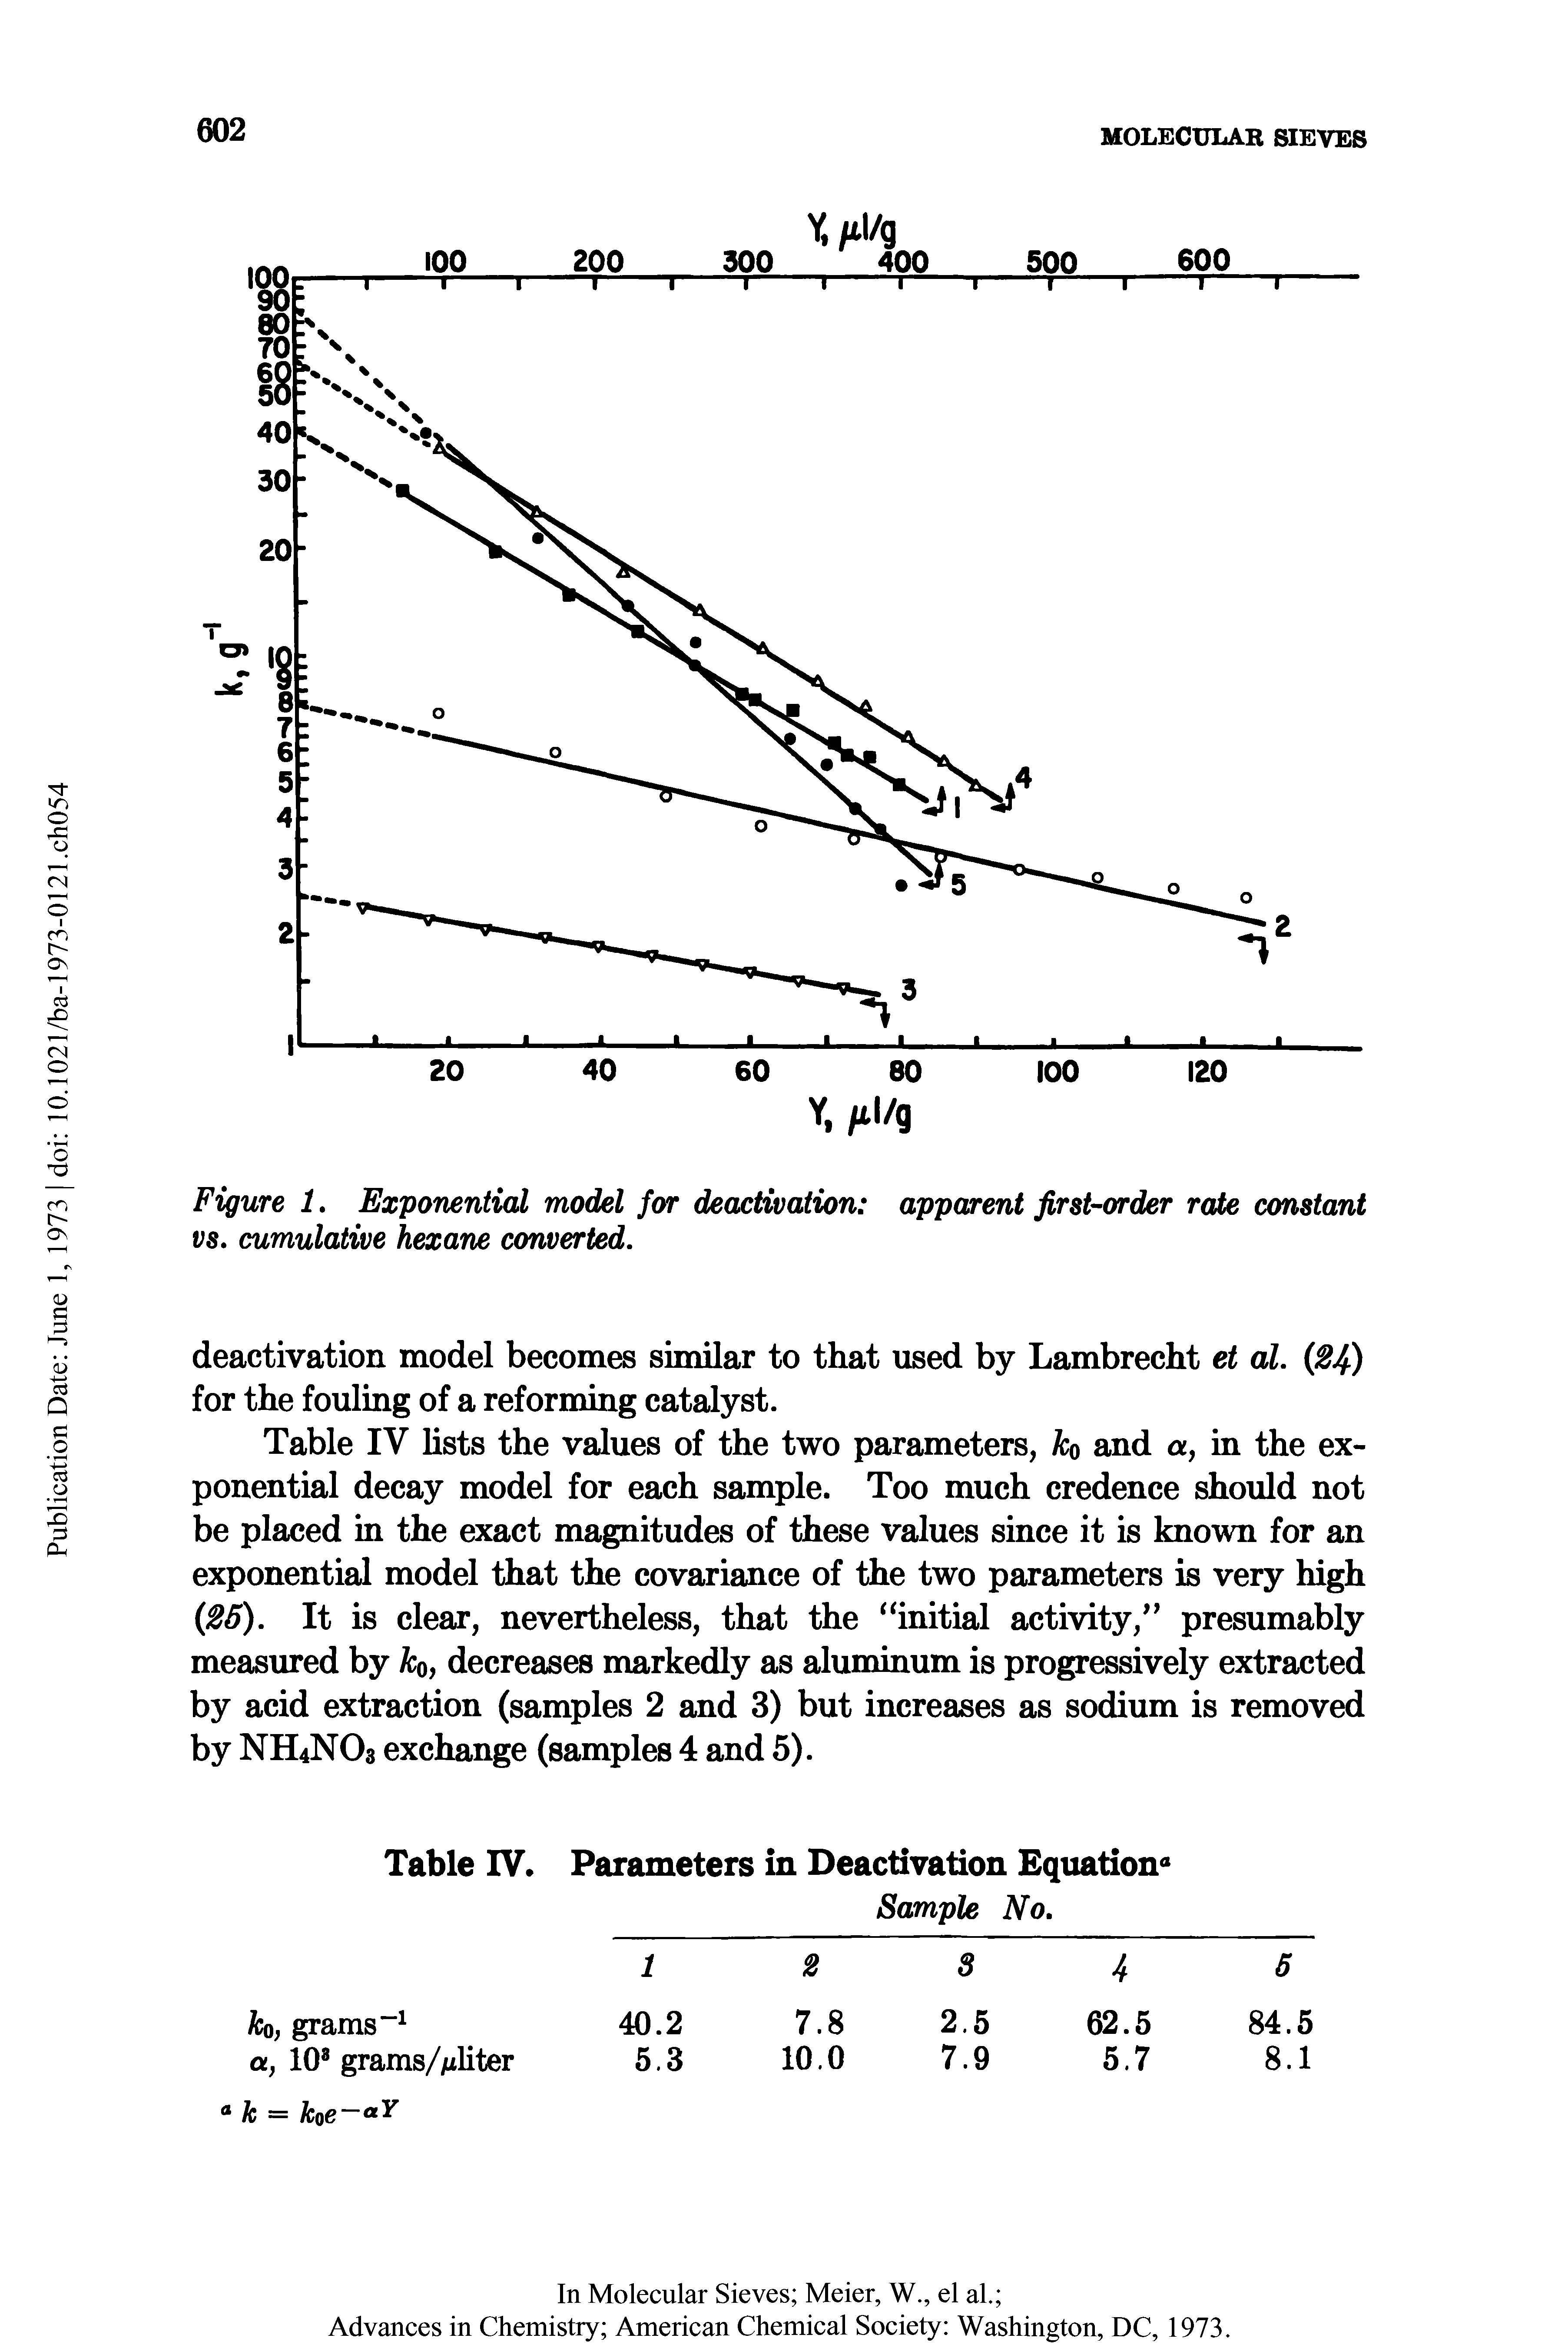 Figure 1. Exponential model for deactivation apparent first-order rate constant vs. cumulative hexane converted.